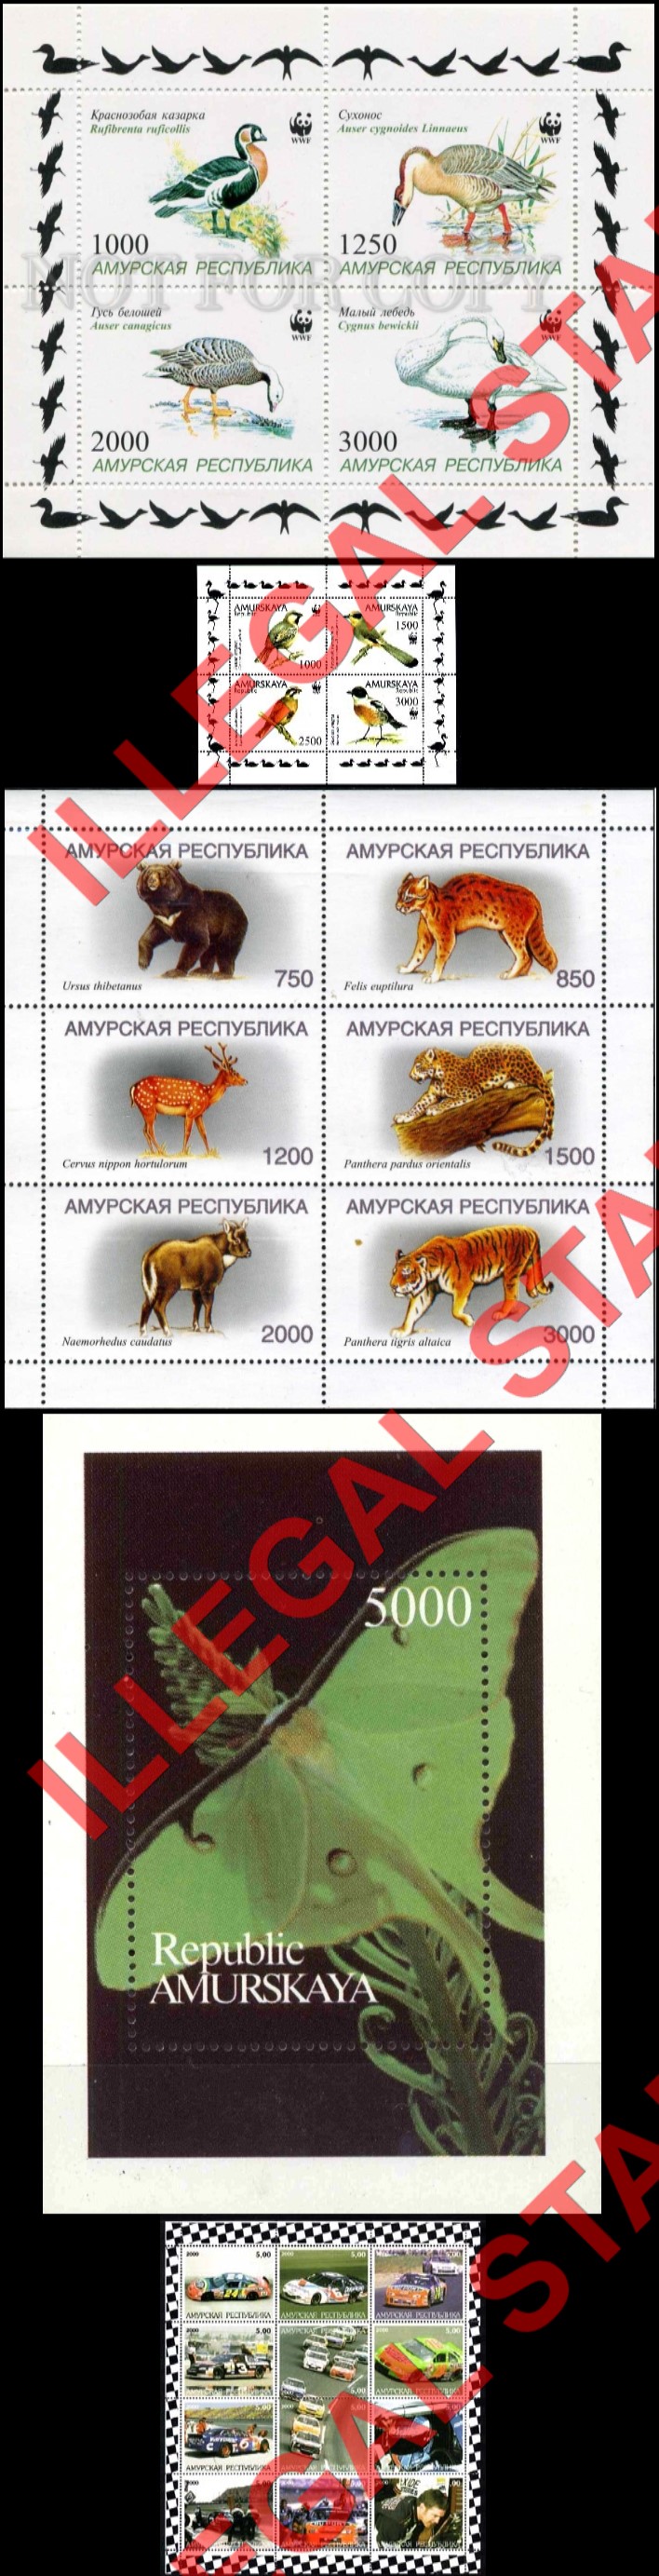 Amurskaya Province 1999-2000 Birds WWF, Animals, Butterflies and Racing Cars Illegal Stamps